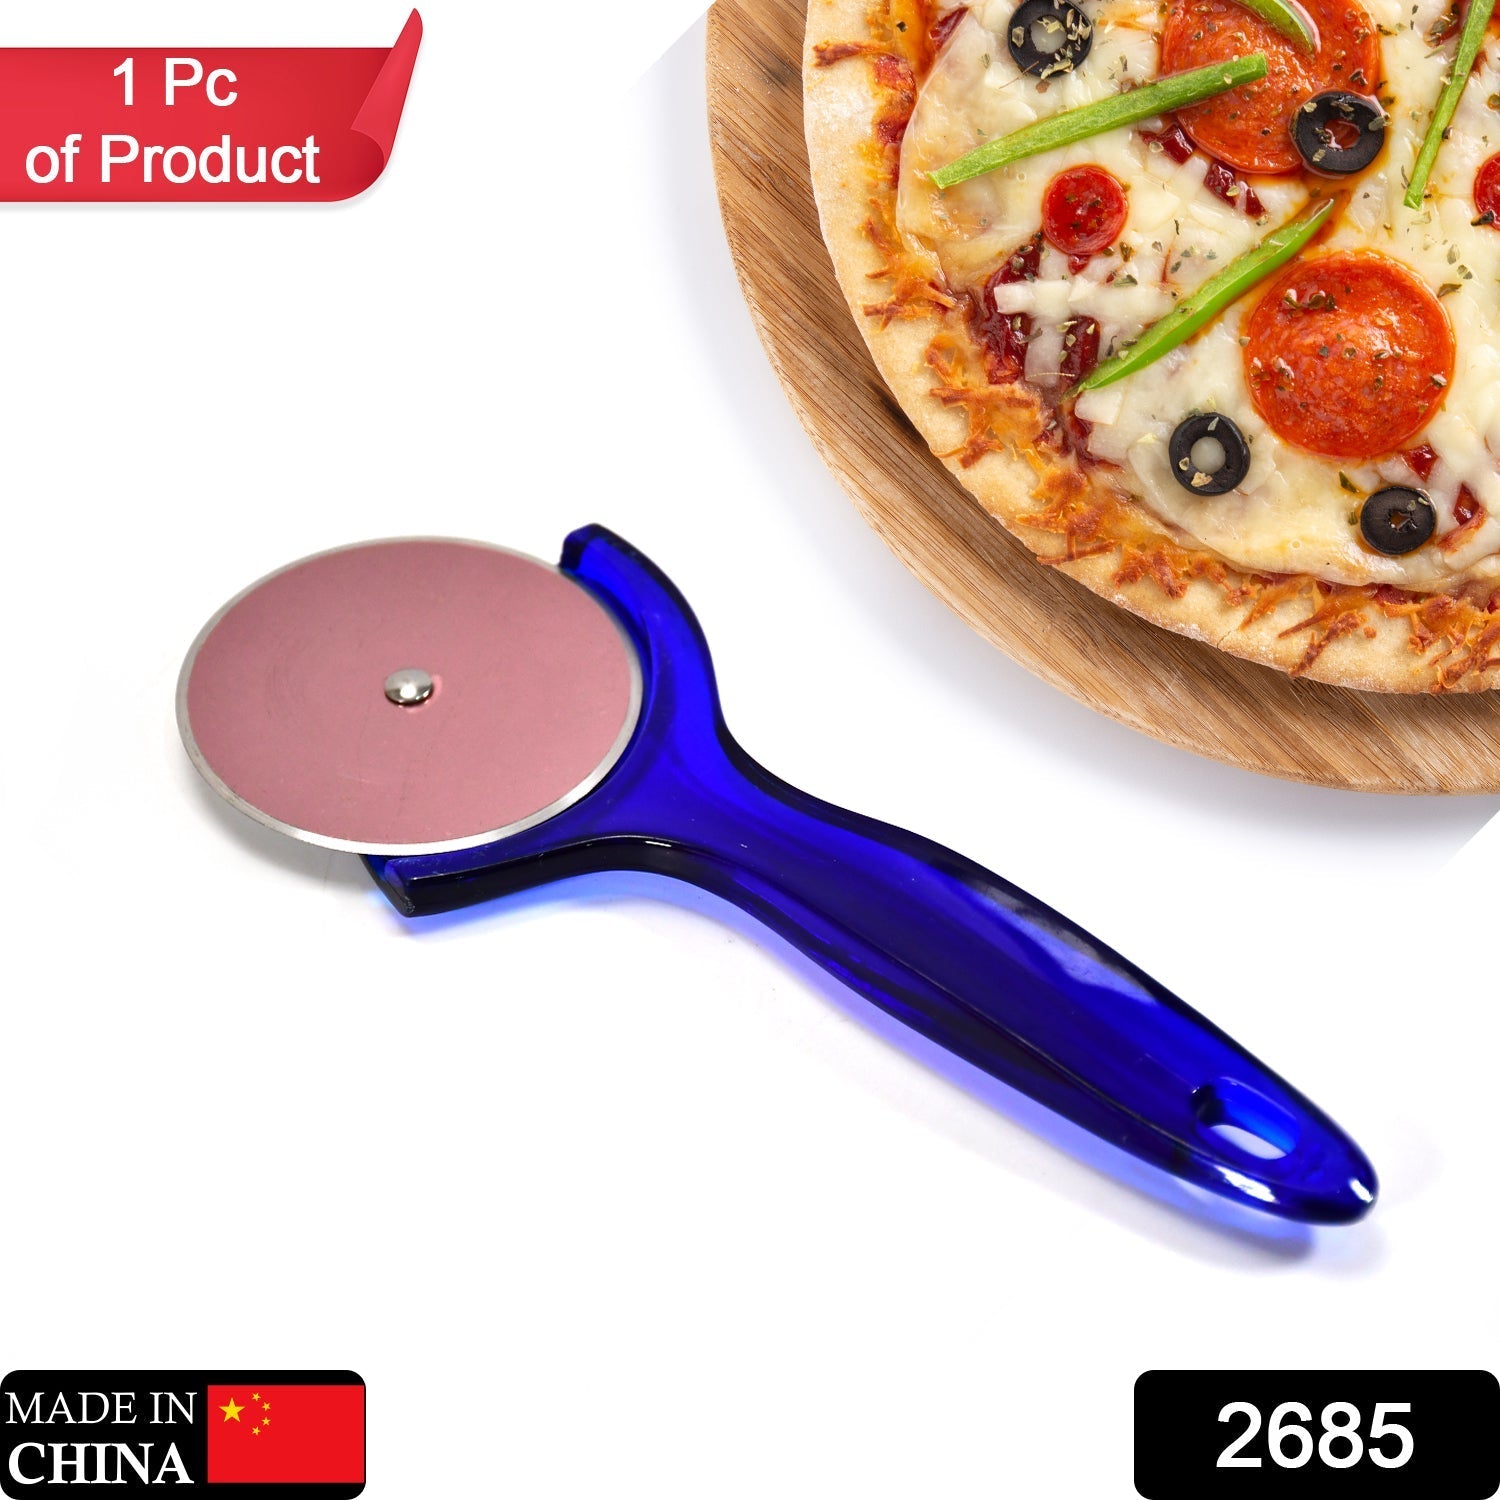 2685 Pizza and Pastry Stainless Steel Multipurpose Roll C Wheel Across Cutter with Handle for Home, Kitchen, Restaurant DeoDap